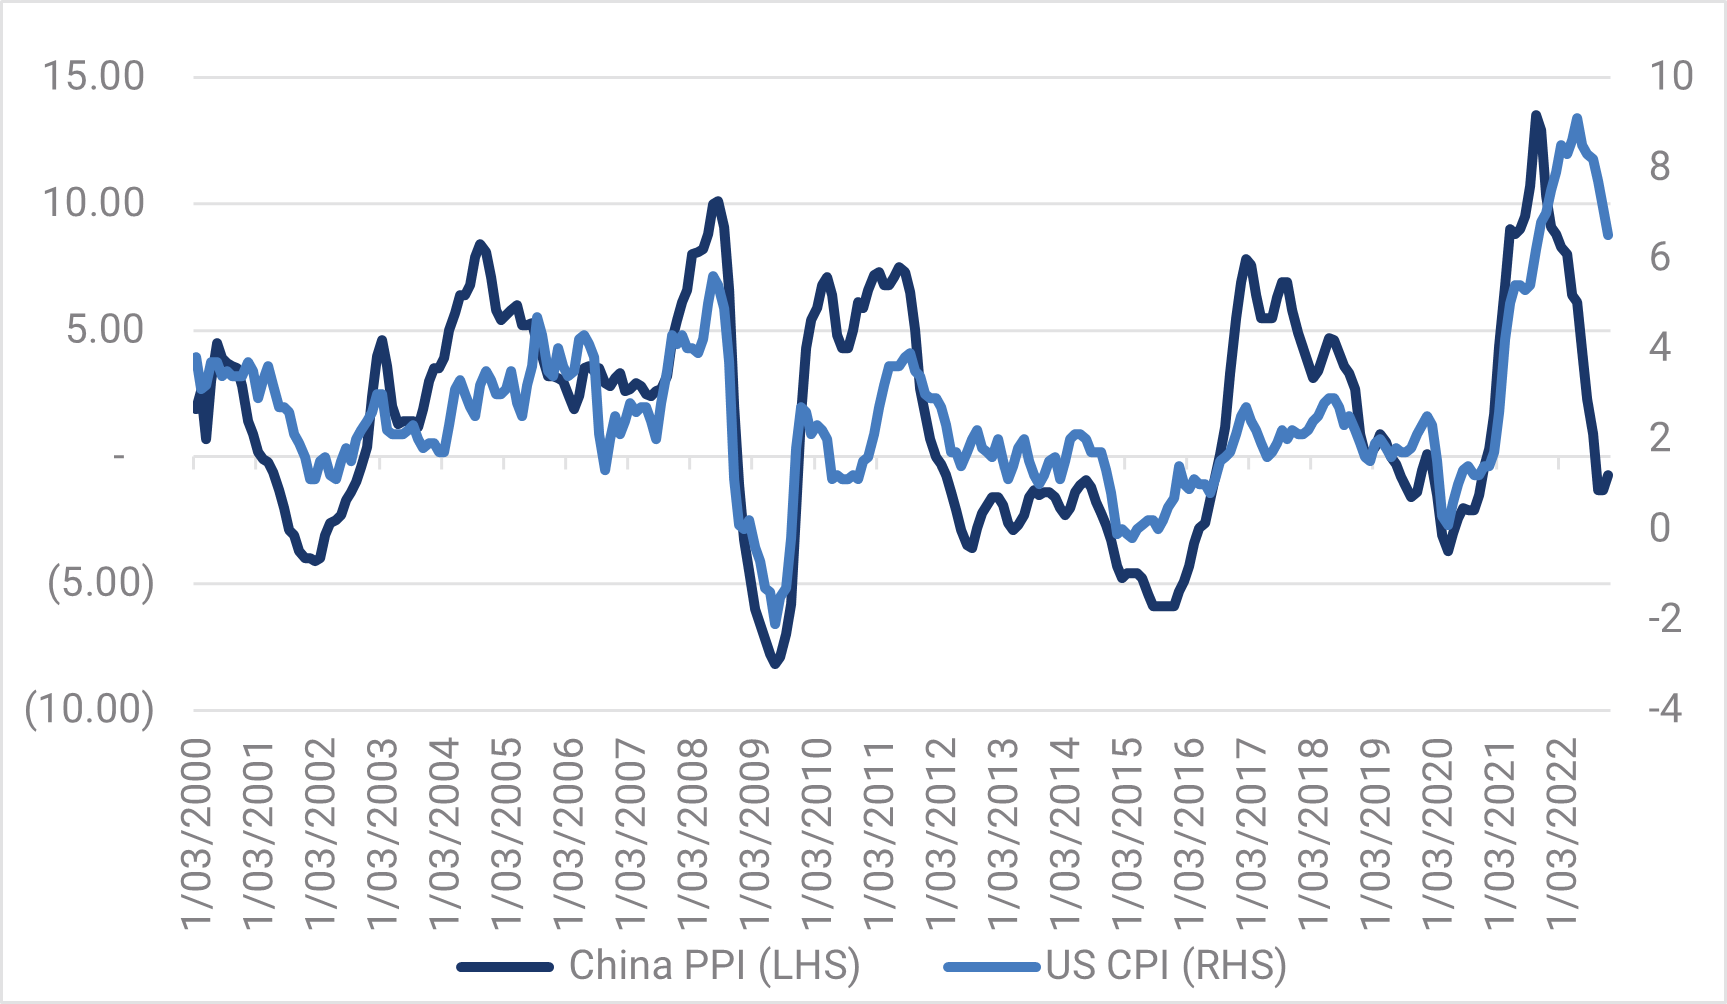 
Chart 3: China Producer Prices and US CPI

Source: YarraCM, Bloomberg